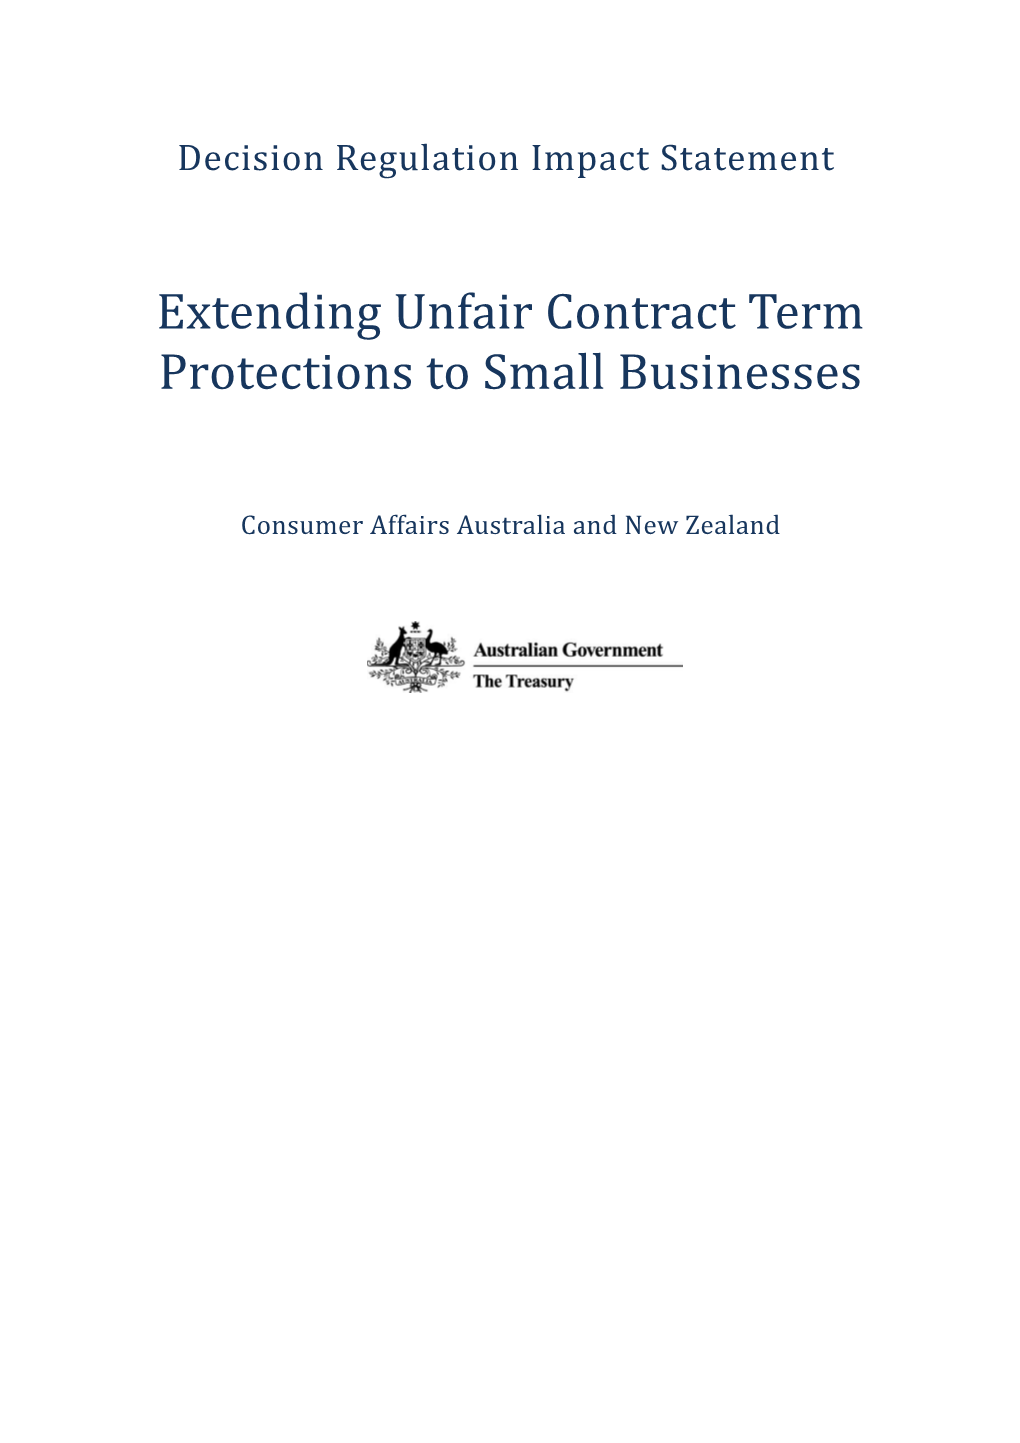 Decision Regulation Impact Statement: Extending Unfair Contract Term Protections to Small